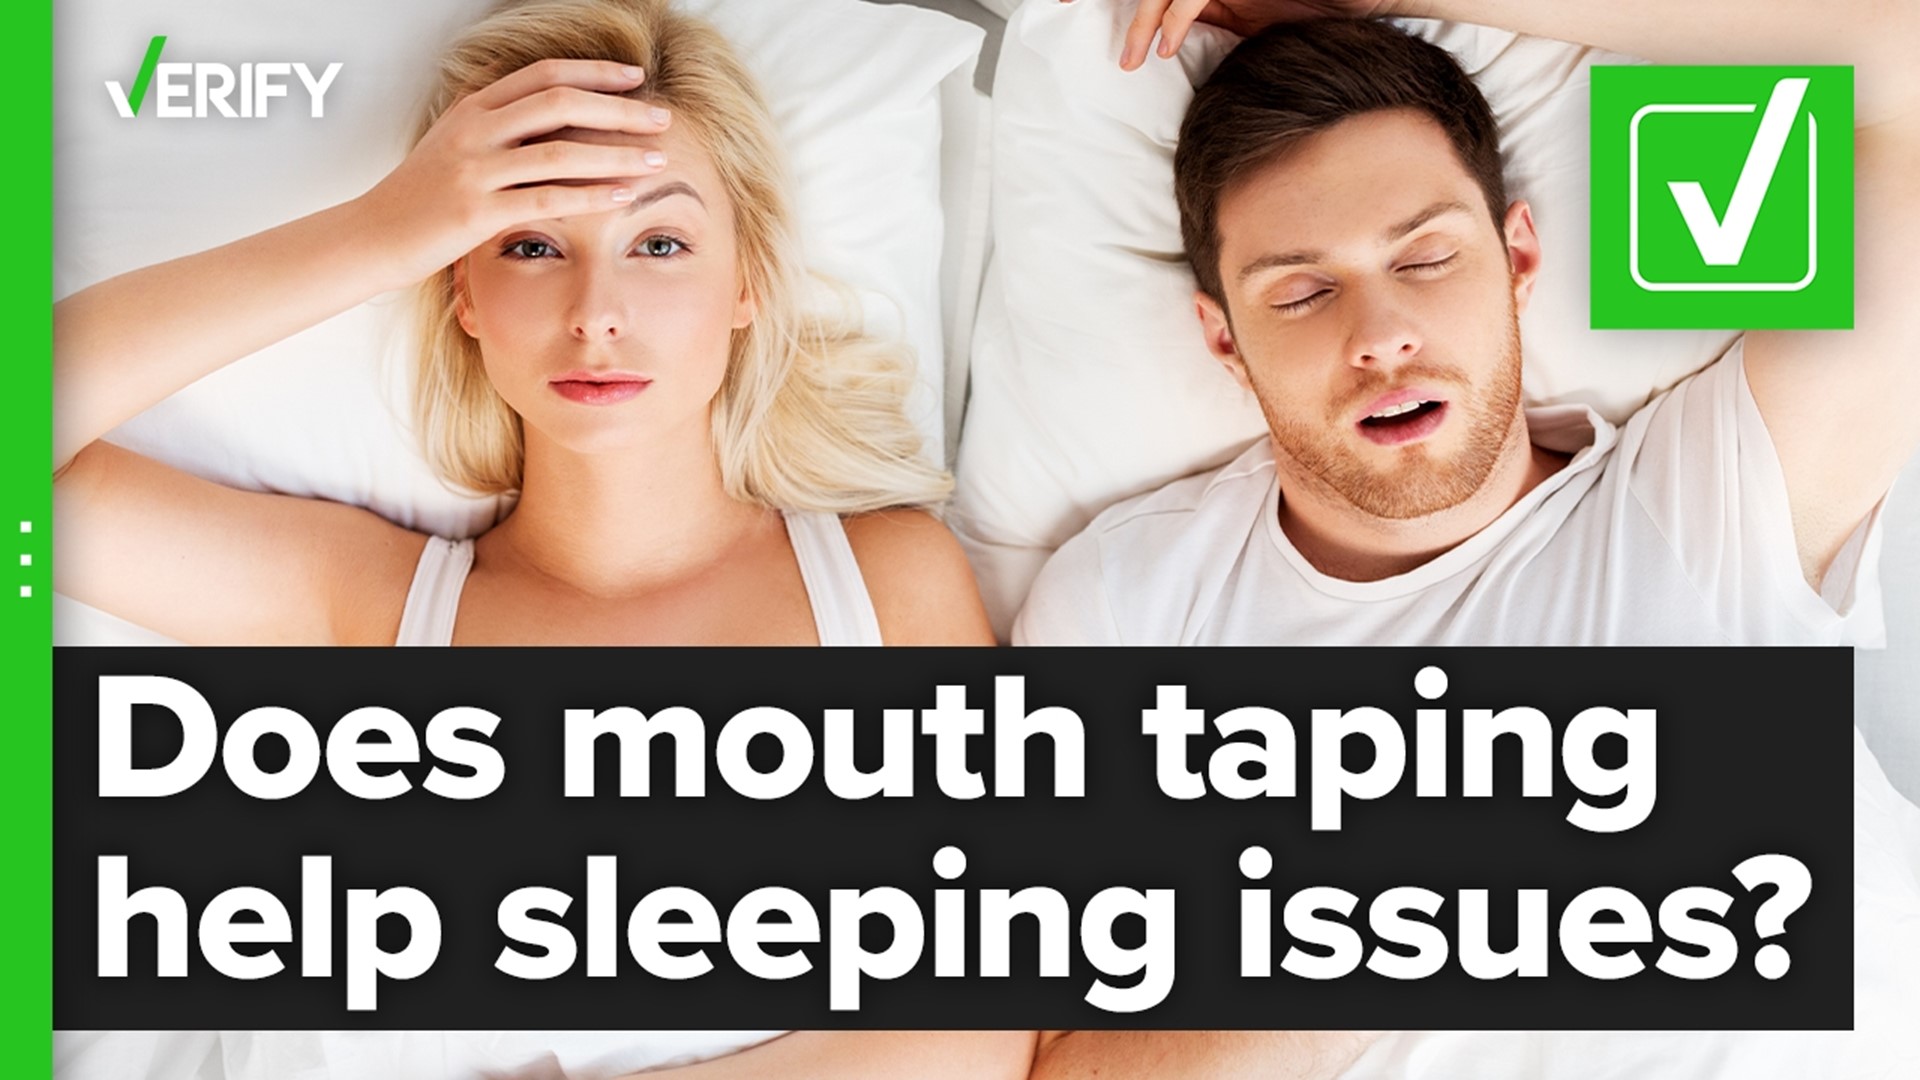 People tape their mouth shut to sleep to treat issues like snoring, bad breath, cavities and gum disease but more research is needed and there are safety risks.